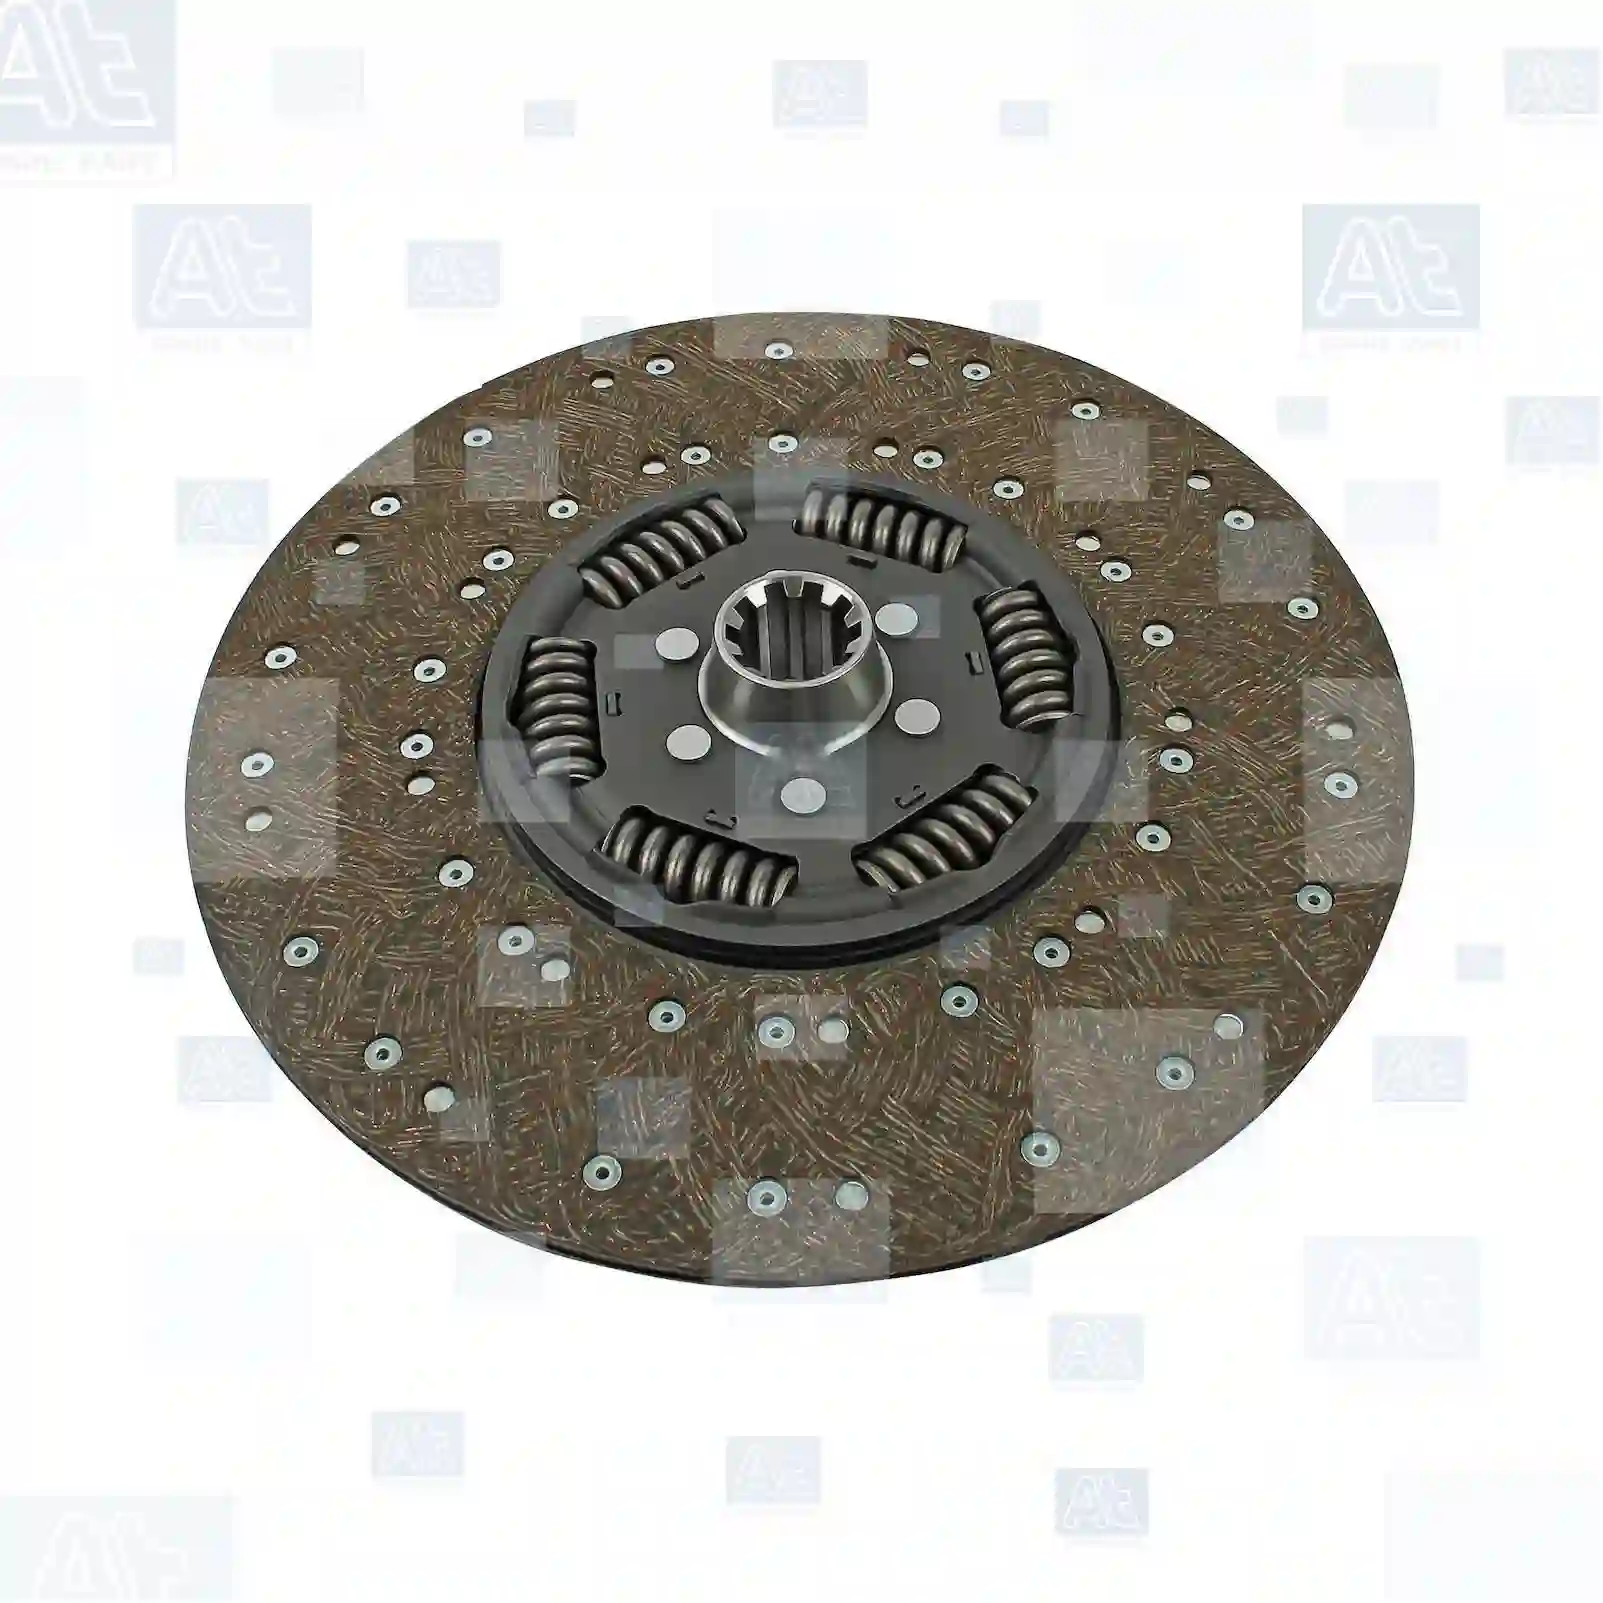 Clutch disc, 77721988, 00055010, 01903836, 01903845, 01903862, 01903865, 01903879, 01903881, 01903886, 01903899, 01903911, 01903924, 01904761, 01904762, 02477897, 04457823, 04459823, 04691736, 04741461, 42100567, 42100571, 42100576, 42114182, 94459823, 04459823, 04691736, 42100567, 42100571, 42100576, 01903836, 01903845, 01903862, 01903865, 01903881, 01903886, 01903911, 01903924, 01904761, 01904762, 02477897, 02991587, 04457823, 04459823, 04691736, 04741461, 04741464, 04830035, 1903862, 1903865, 2477897, 42100567, 42100571, 42100576, 42114182, 4457823, 4459823, 4691736, 4741461, 94459823, 5290559, 5292189, 632100090, 632100410 ||  77721988 At Spare Part | Engine, Accelerator Pedal, Camshaft, Connecting Rod, Crankcase, Crankshaft, Cylinder Head, Engine Suspension Mountings, Exhaust Manifold, Exhaust Gas Recirculation, Filter Kits, Flywheel Housing, General Overhaul Kits, Engine, Intake Manifold, Oil Cleaner, Oil Cooler, Oil Filter, Oil Pump, Oil Sump, Piston & Liner, Sensor & Switch, Timing Case, Turbocharger, Cooling System, Belt Tensioner, Coolant Filter, Coolant Pipe, Corrosion Prevention Agent, Drive, Expansion Tank, Fan, Intercooler, Monitors & Gauges, Radiator, Thermostat, V-Belt / Timing belt, Water Pump, Fuel System, Electronical Injector Unit, Feed Pump, Fuel Filter, cpl., Fuel Gauge Sender,  Fuel Line, Fuel Pump, Fuel Tank, Injection Line Kit, Injection Pump, Exhaust System, Clutch & Pedal, Gearbox, Propeller Shaft, Axles, Brake System, Hubs & Wheels, Suspension, Leaf Spring, Universal Parts / Accessories, Steering, Electrical System, Cabin Clutch disc, 77721988, 00055010, 01903836, 01903845, 01903862, 01903865, 01903879, 01903881, 01903886, 01903899, 01903911, 01903924, 01904761, 01904762, 02477897, 04457823, 04459823, 04691736, 04741461, 42100567, 42100571, 42100576, 42114182, 94459823, 04459823, 04691736, 42100567, 42100571, 42100576, 01903836, 01903845, 01903862, 01903865, 01903881, 01903886, 01903911, 01903924, 01904761, 01904762, 02477897, 02991587, 04457823, 04459823, 04691736, 04741461, 04741464, 04830035, 1903862, 1903865, 2477897, 42100567, 42100571, 42100576, 42114182, 4457823, 4459823, 4691736, 4741461, 94459823, 5290559, 5292189, 632100090, 632100410 ||  77721988 At Spare Part | Engine, Accelerator Pedal, Camshaft, Connecting Rod, Crankcase, Crankshaft, Cylinder Head, Engine Suspension Mountings, Exhaust Manifold, Exhaust Gas Recirculation, Filter Kits, Flywheel Housing, General Overhaul Kits, Engine, Intake Manifold, Oil Cleaner, Oil Cooler, Oil Filter, Oil Pump, Oil Sump, Piston & Liner, Sensor & Switch, Timing Case, Turbocharger, Cooling System, Belt Tensioner, Coolant Filter, Coolant Pipe, Corrosion Prevention Agent, Drive, Expansion Tank, Fan, Intercooler, Monitors & Gauges, Radiator, Thermostat, V-Belt / Timing belt, Water Pump, Fuel System, Electronical Injector Unit, Feed Pump, Fuel Filter, cpl., Fuel Gauge Sender,  Fuel Line, Fuel Pump, Fuel Tank, Injection Line Kit, Injection Pump, Exhaust System, Clutch & Pedal, Gearbox, Propeller Shaft, Axles, Brake System, Hubs & Wheels, Suspension, Leaf Spring, Universal Parts / Accessories, Steering, Electrical System, Cabin